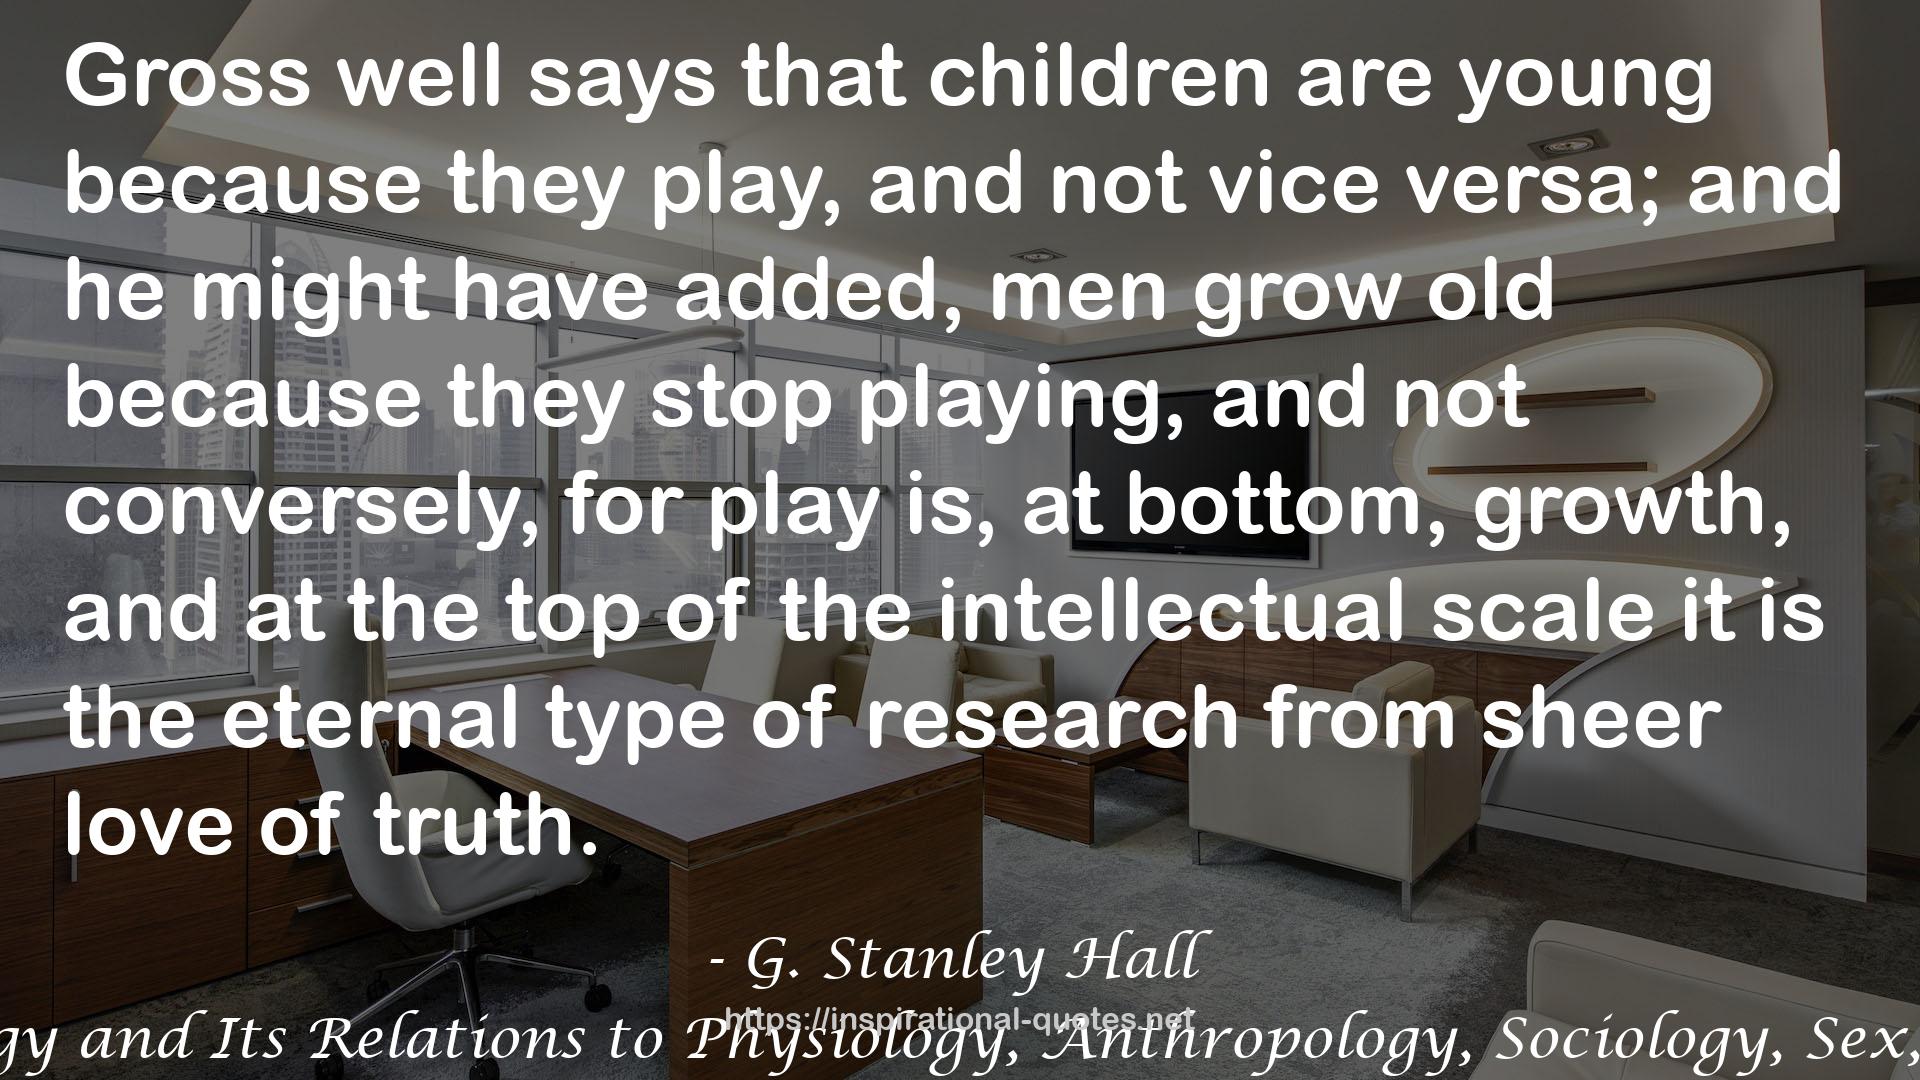 G. Stanley Hall QUOTES